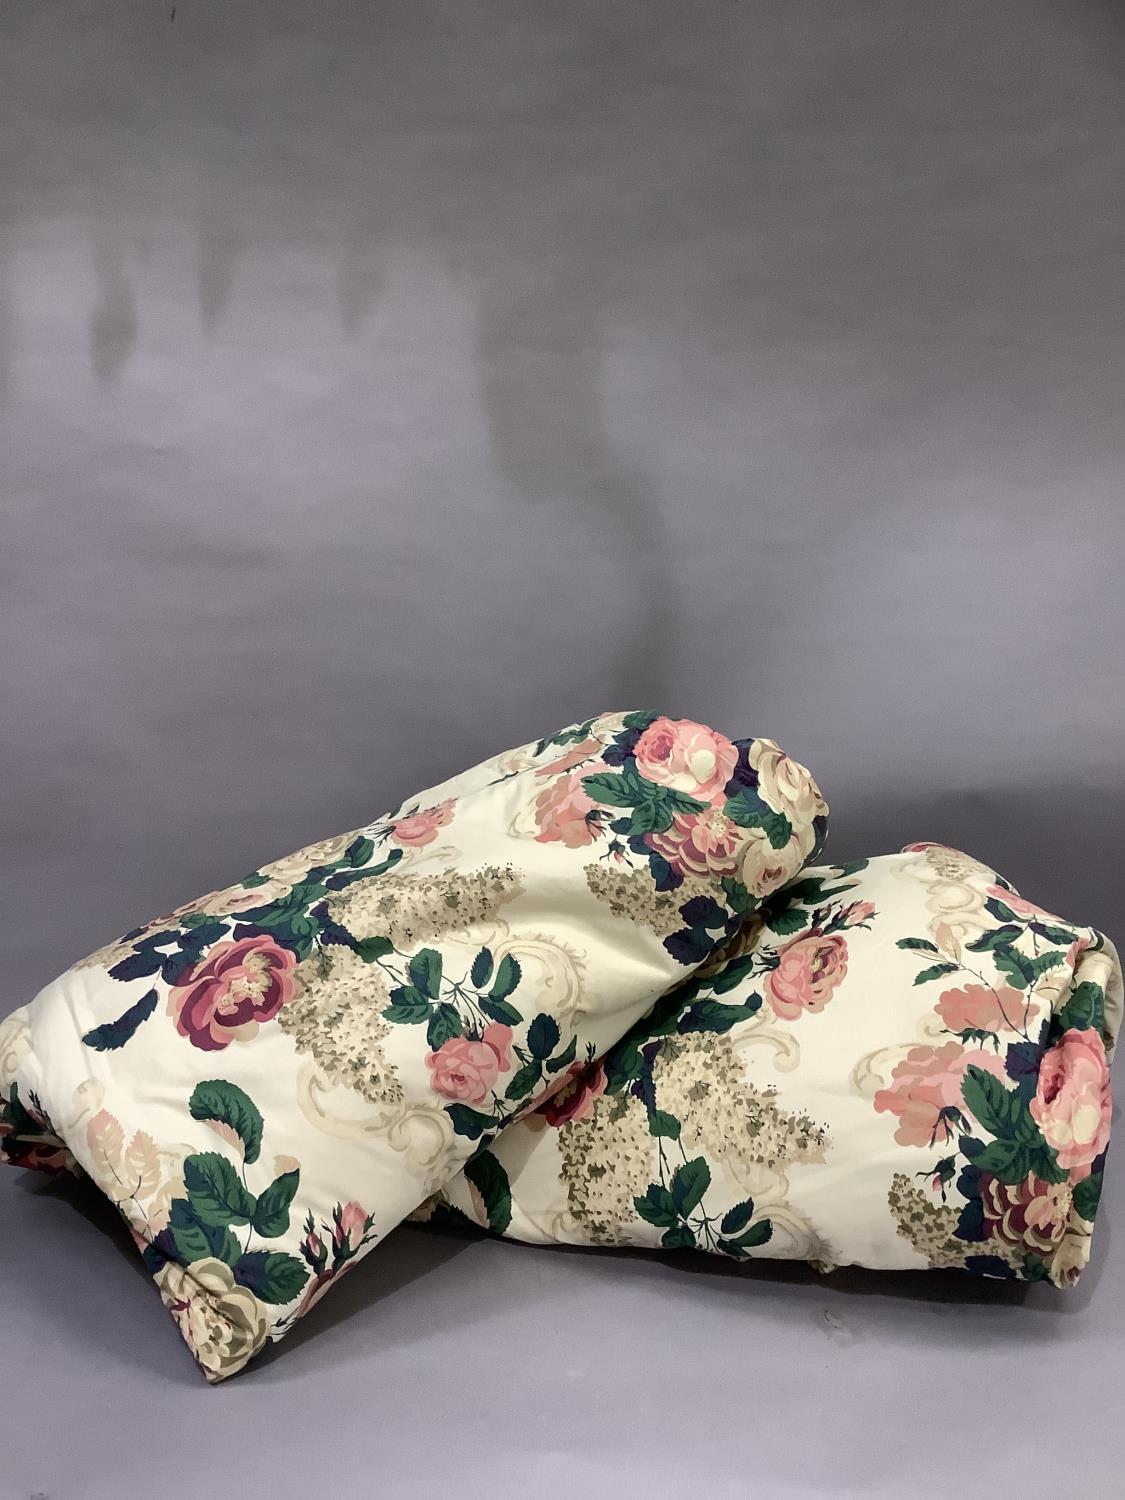 A pair of cotton curtains of floral design with bump linings